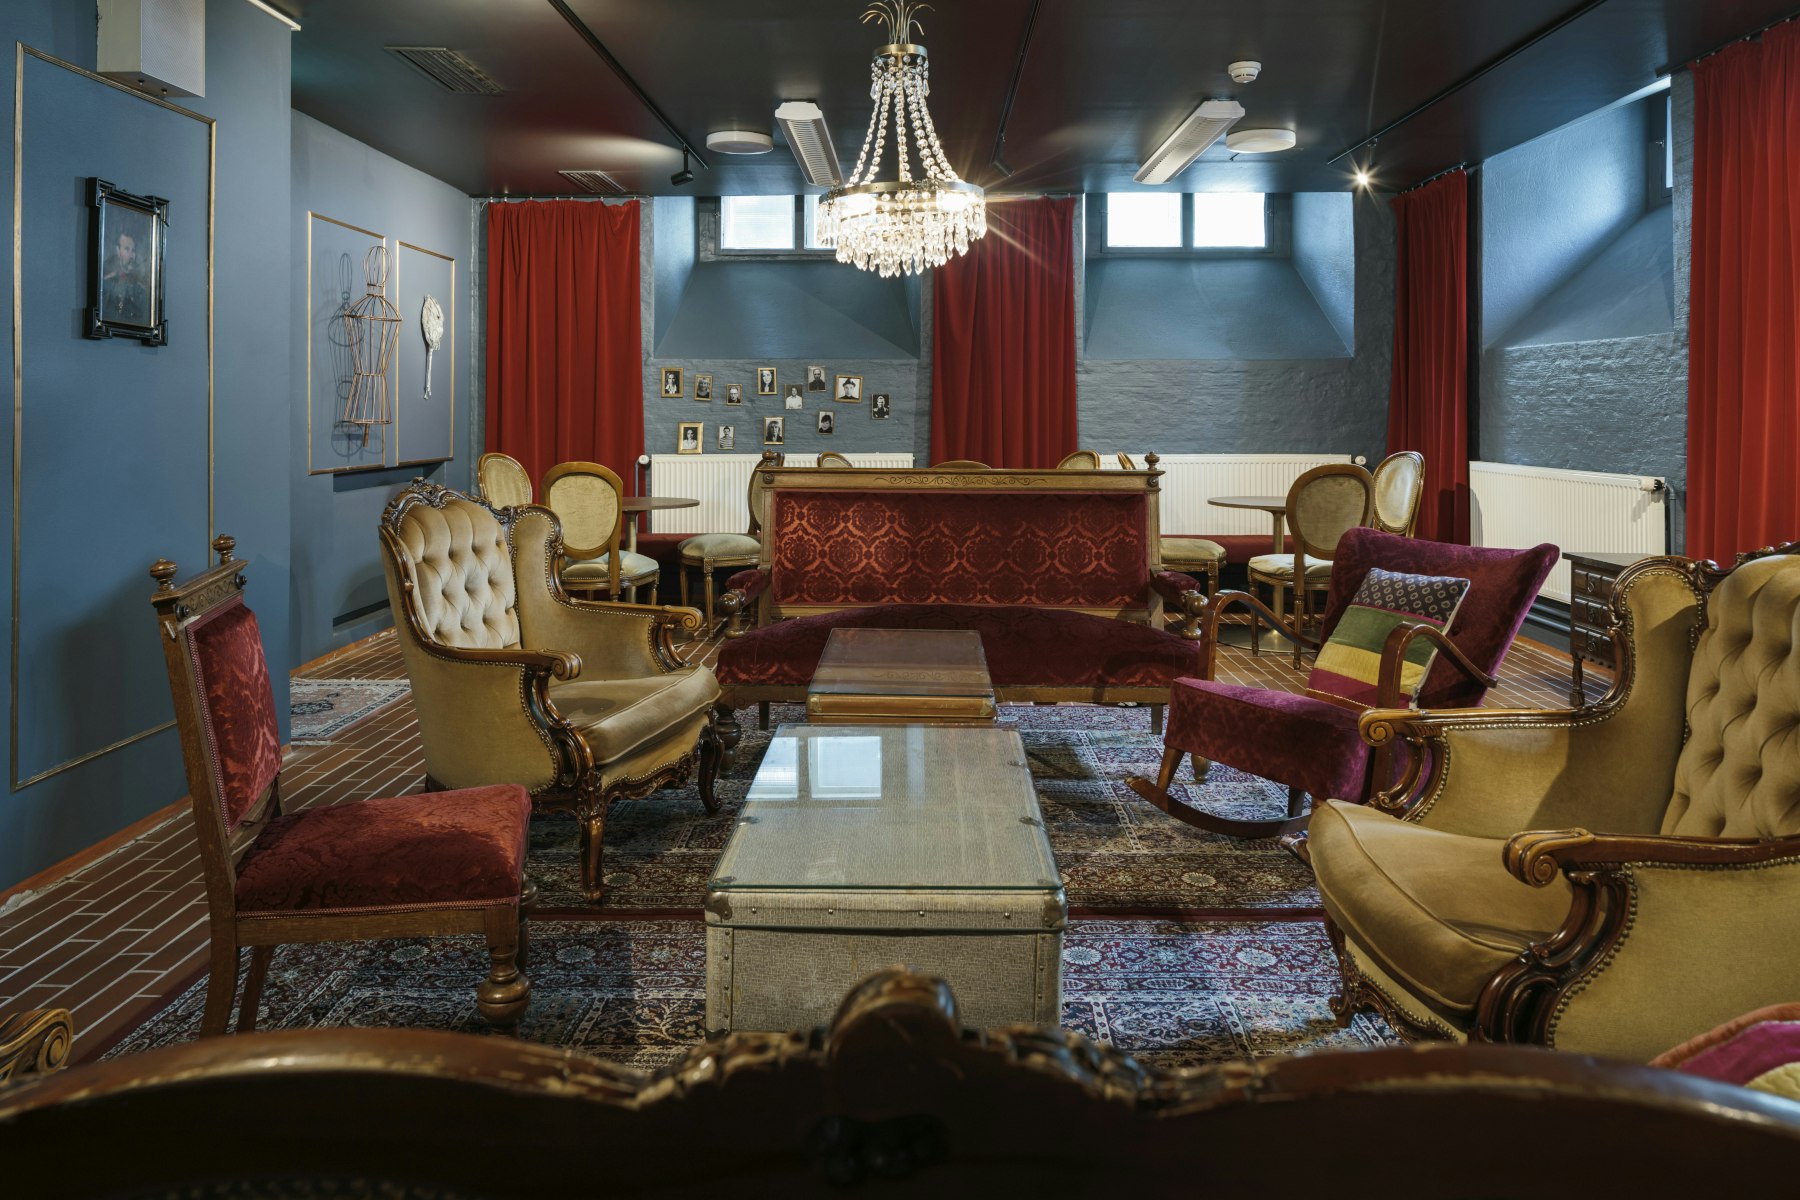 A picture of one of the theatre's sitting rooms with sofas, armchairs and richly decorated carpets and curtains